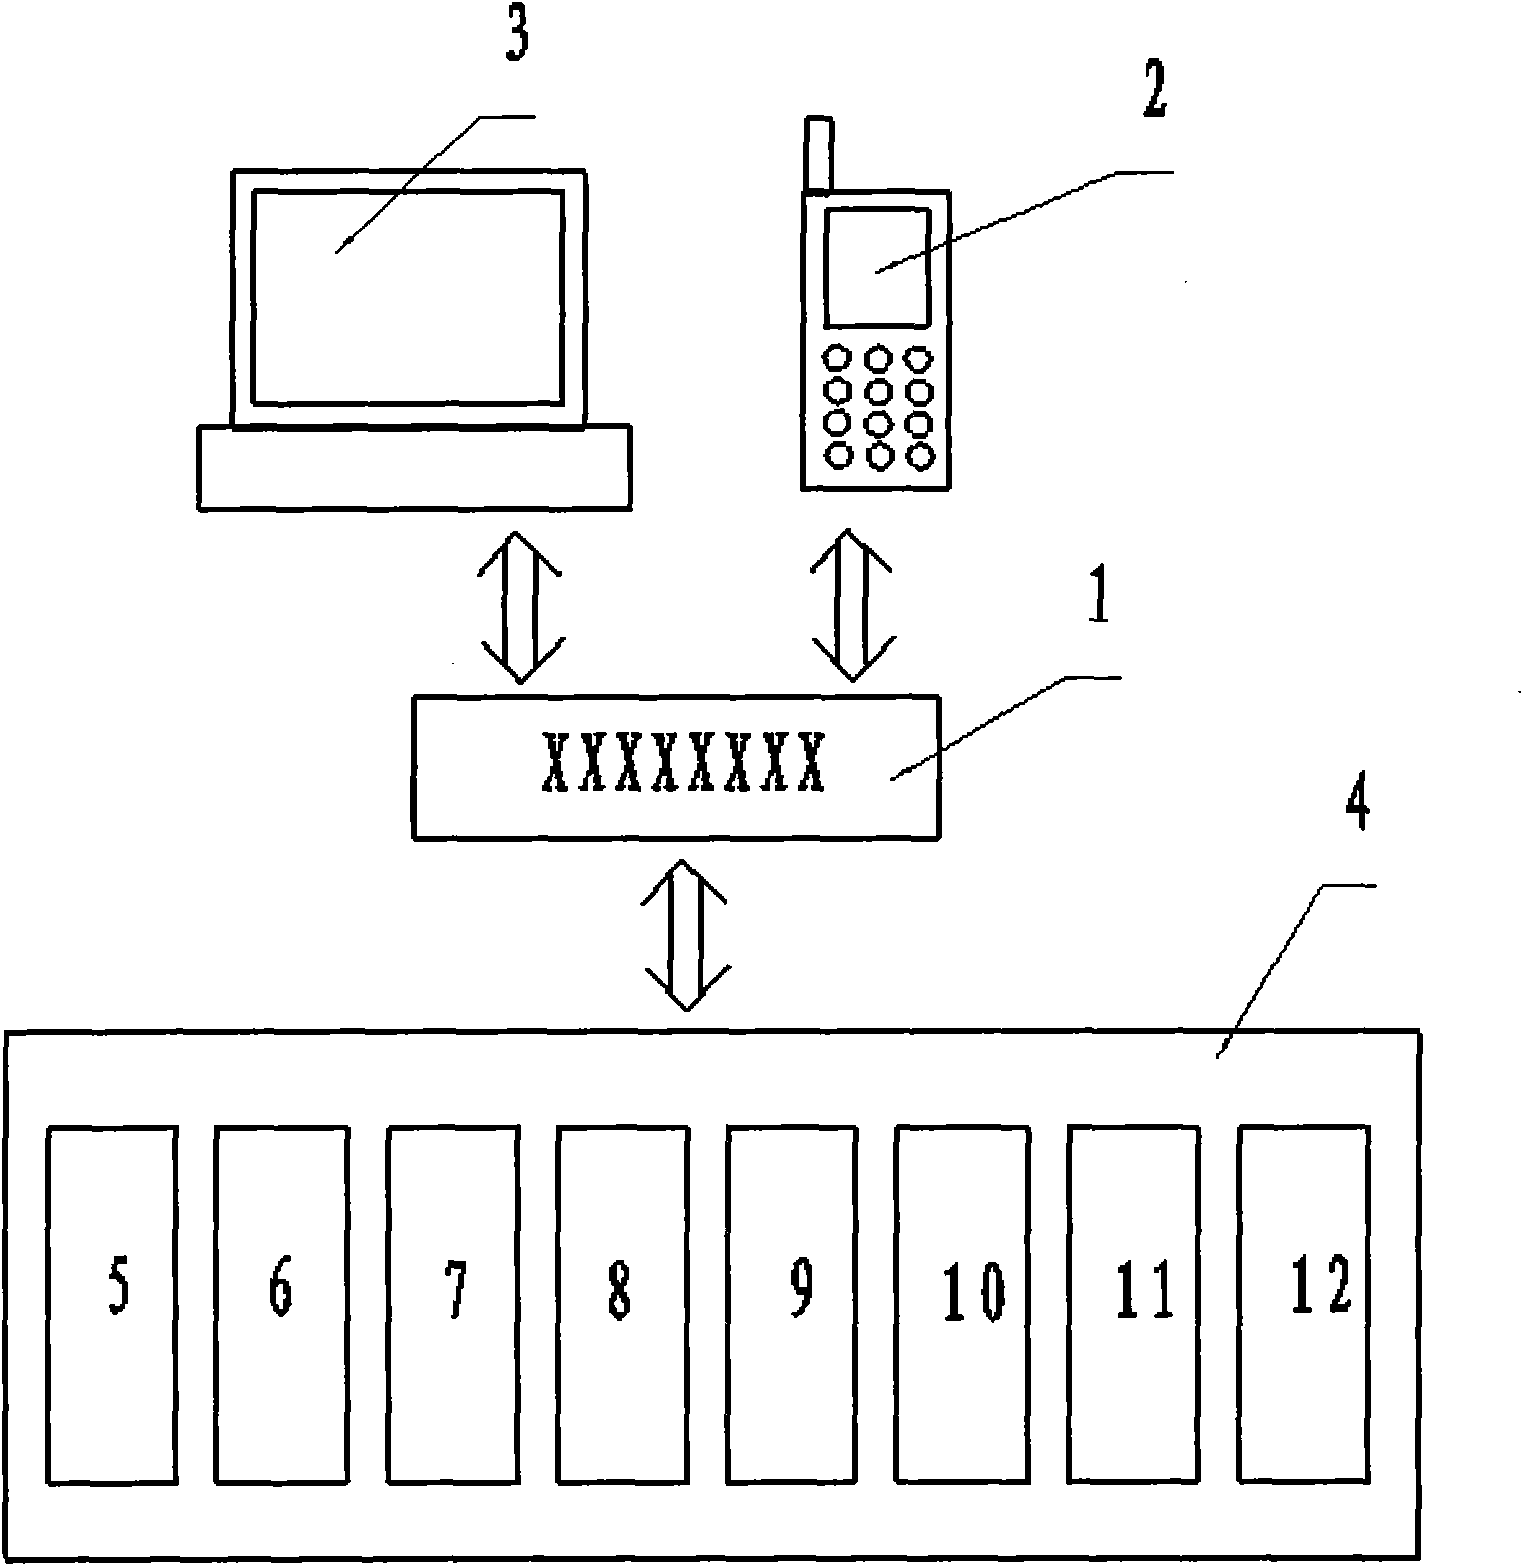 System and method for querying health archive by using communication number